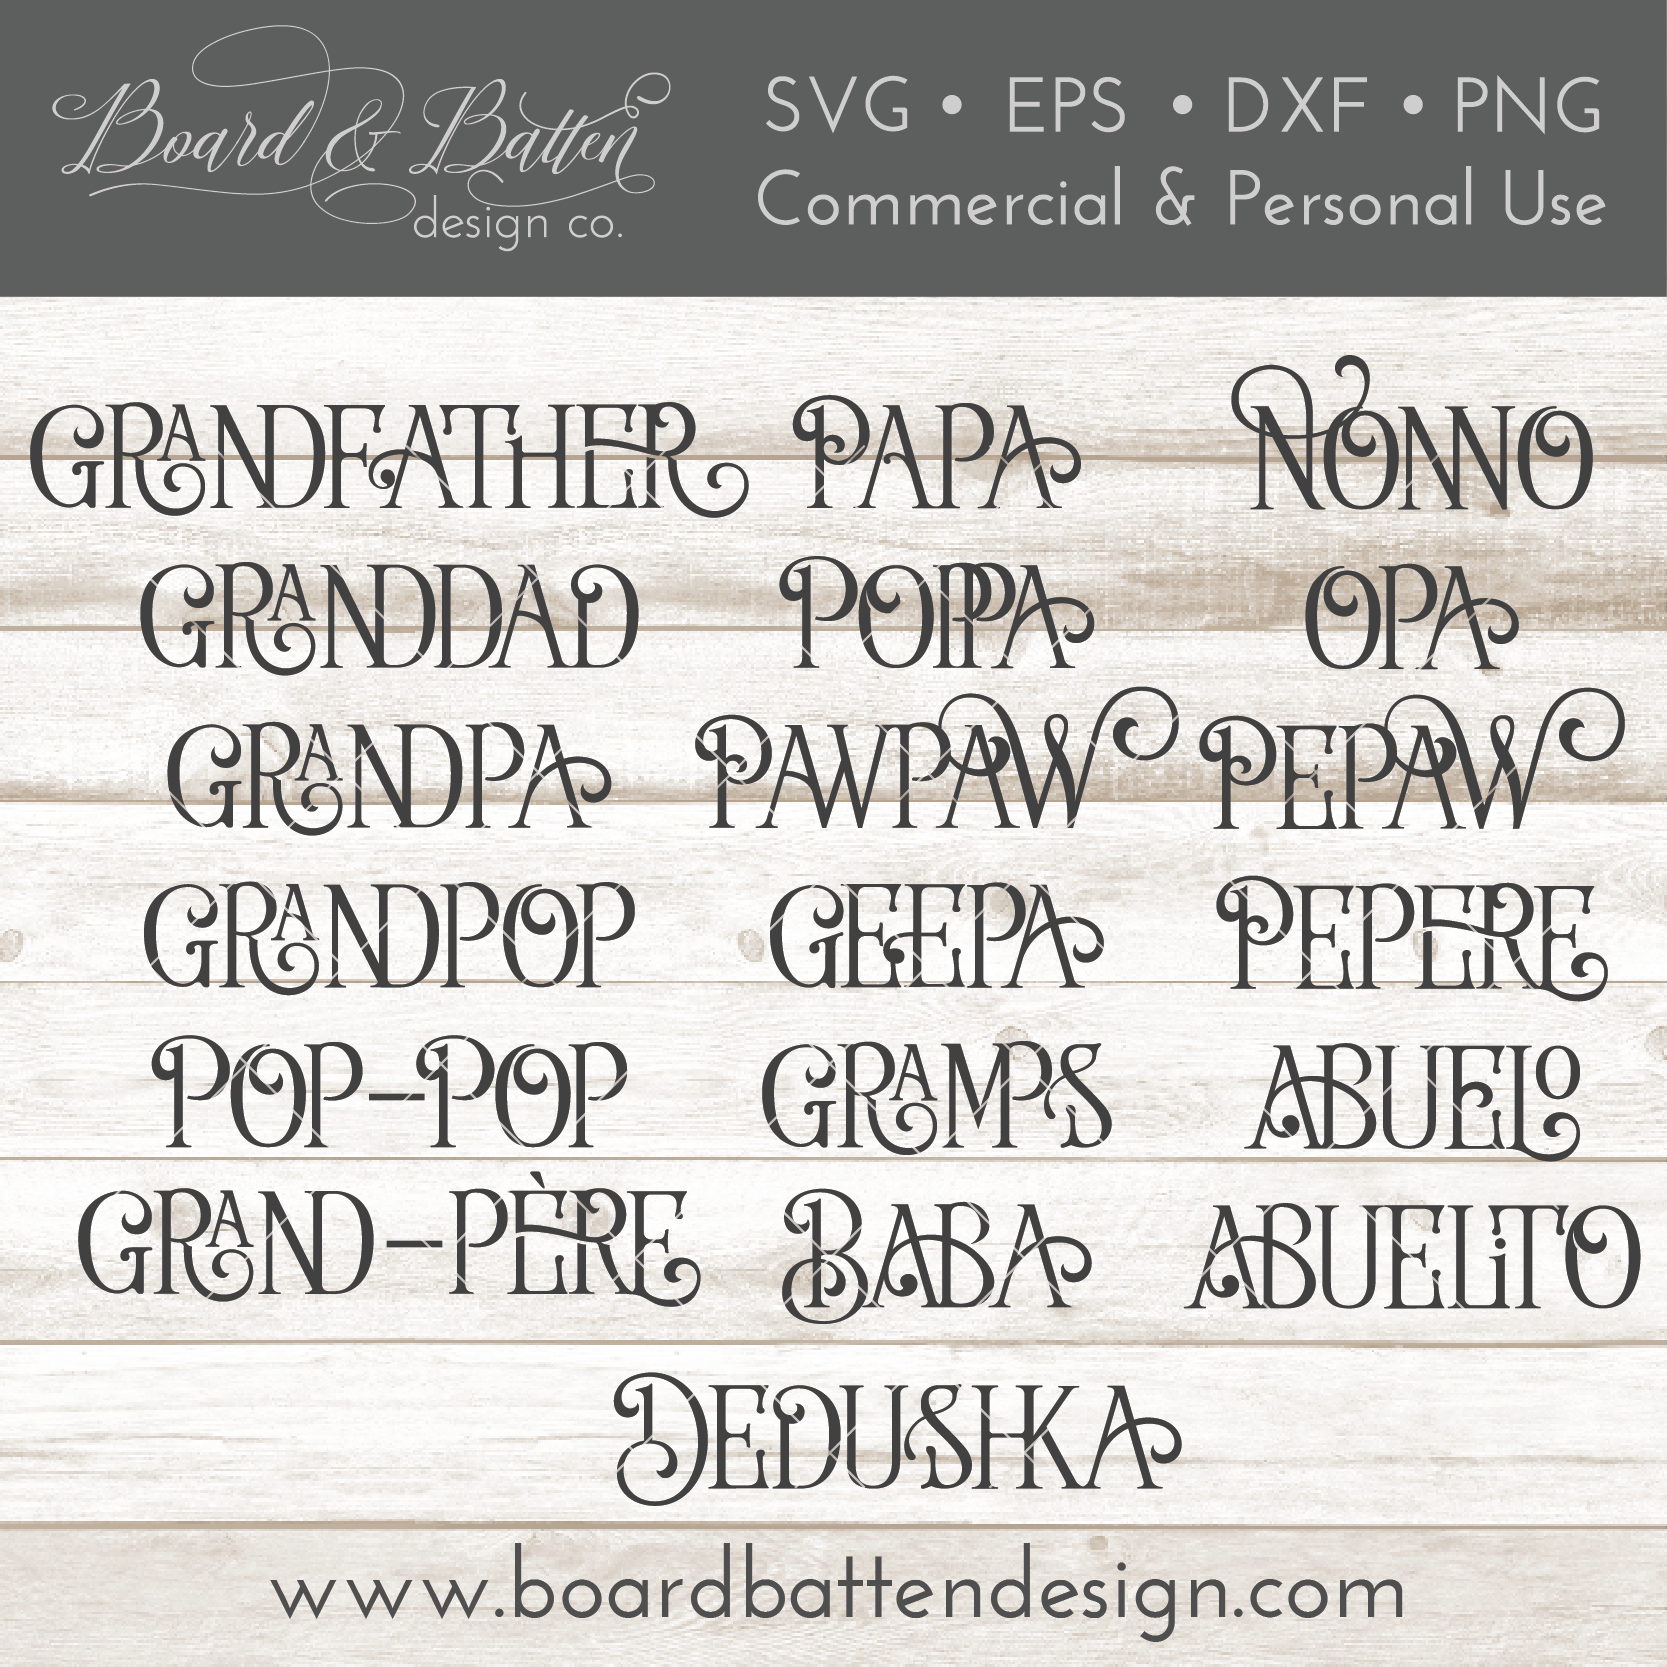 Farmhouse Style set of words for "Grandfather" SVG File - Commercial Use SVG Files for Cricut & Silhouette